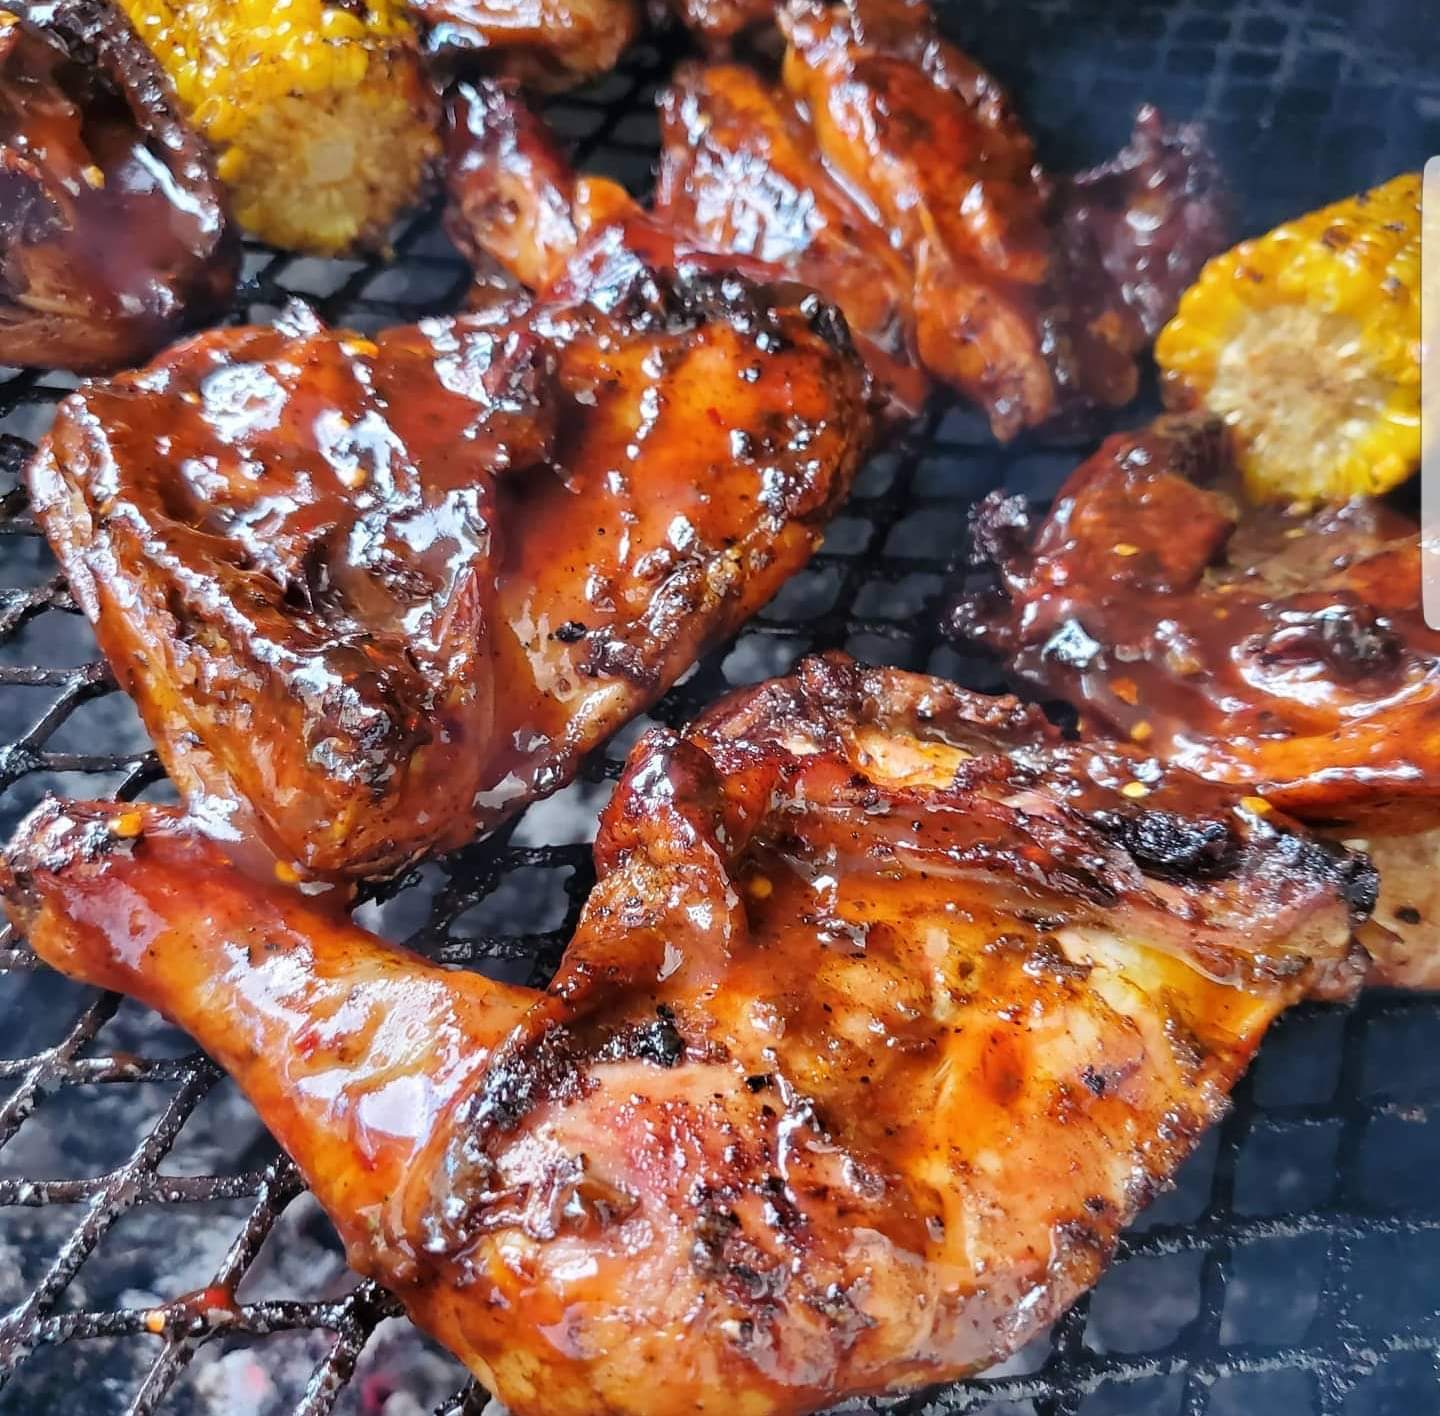 Jamaican creative food hot spot cook out 7th October 2022